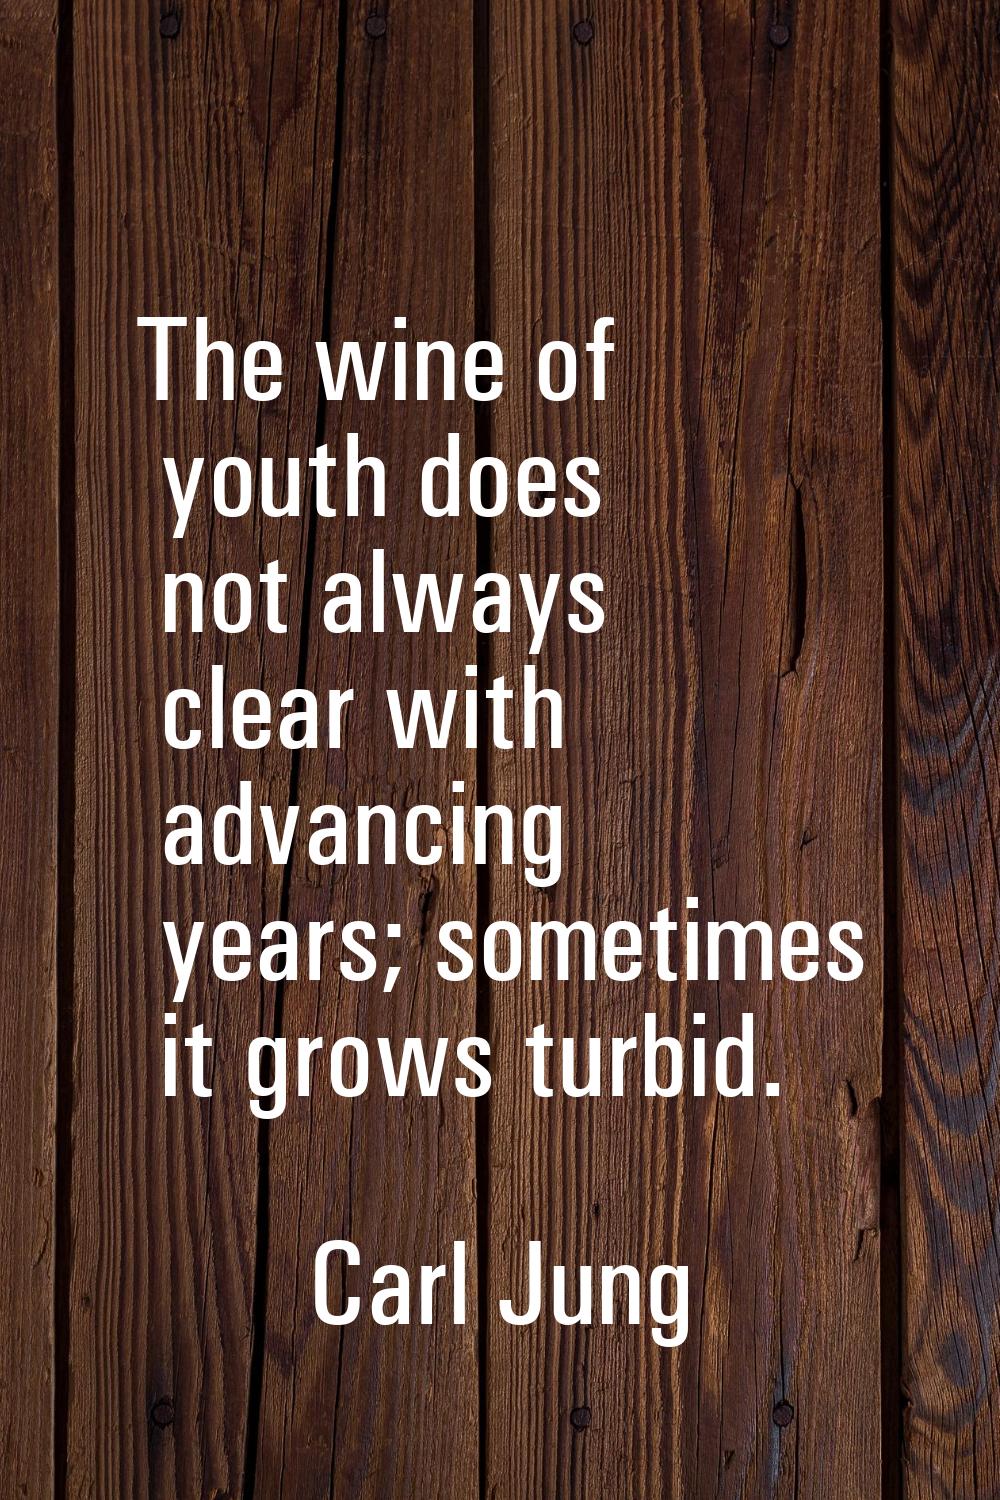 The wine of youth does not always clear with advancing years; sometimes it grows turbid.